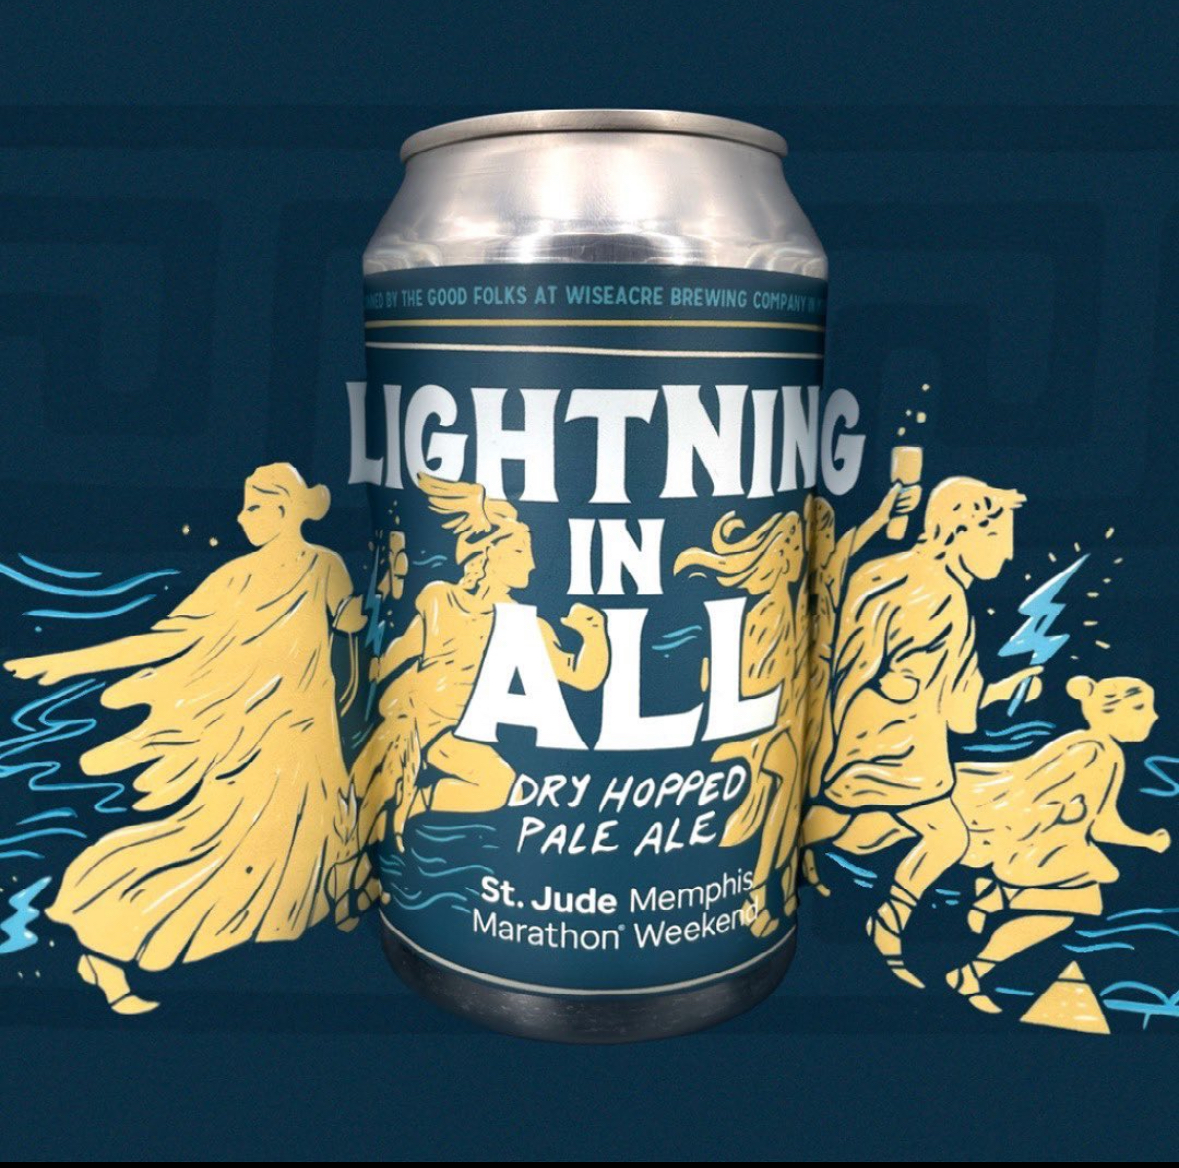 Lightning in All Dry Hopped Pale Ale! ⚡️ In celebration of the St. Jude Marathon, we were asked to brew a beer for running. Join us Dec 2 at HQ for St Jude Marathon watch party at 7AM. We will be serving breakfast and brews, bring your race bib for 20% off all beer tabs⁠